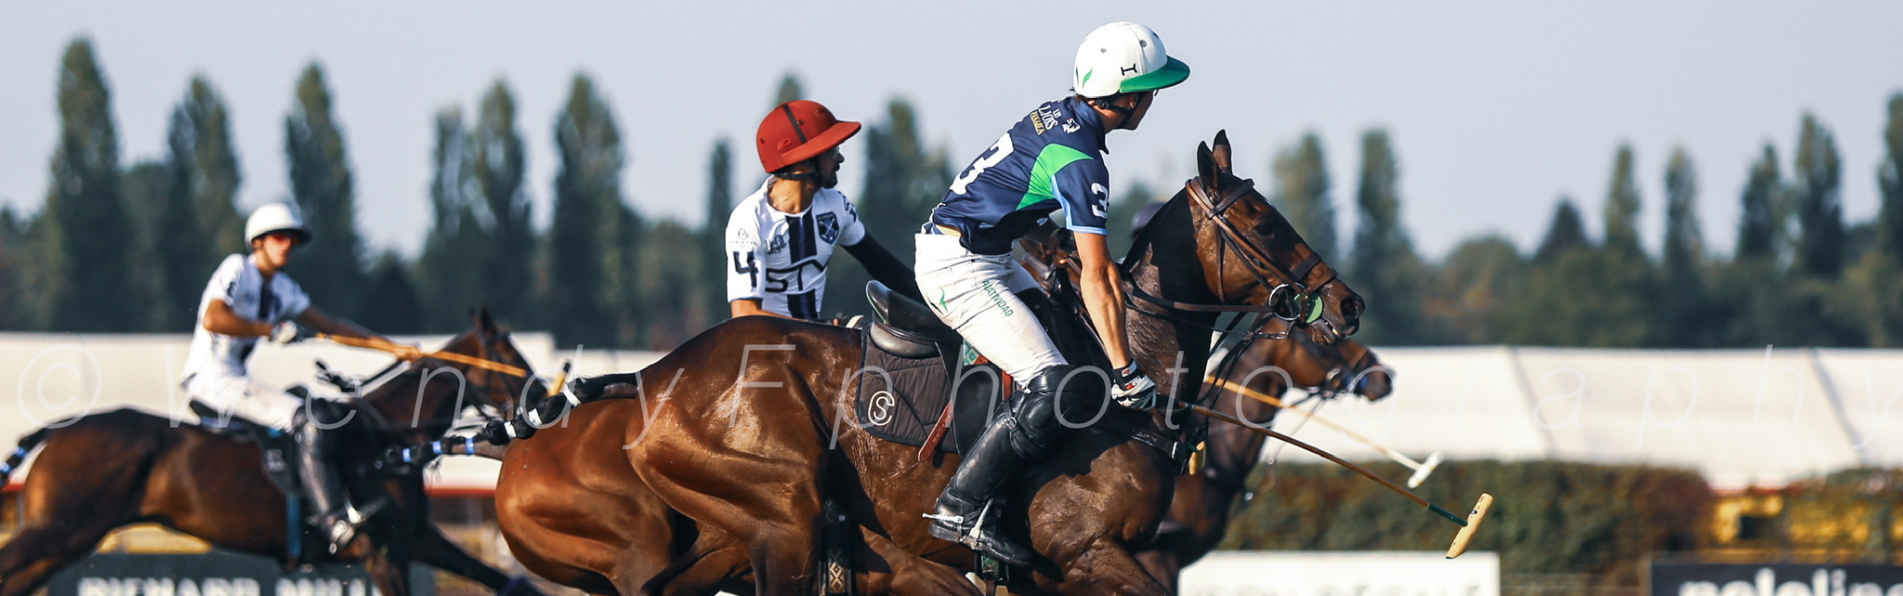 https://www.kronopolo.com/image/cache/catalog/blog/banner%202/is-polo-a-difficult-sport-1903x596.png